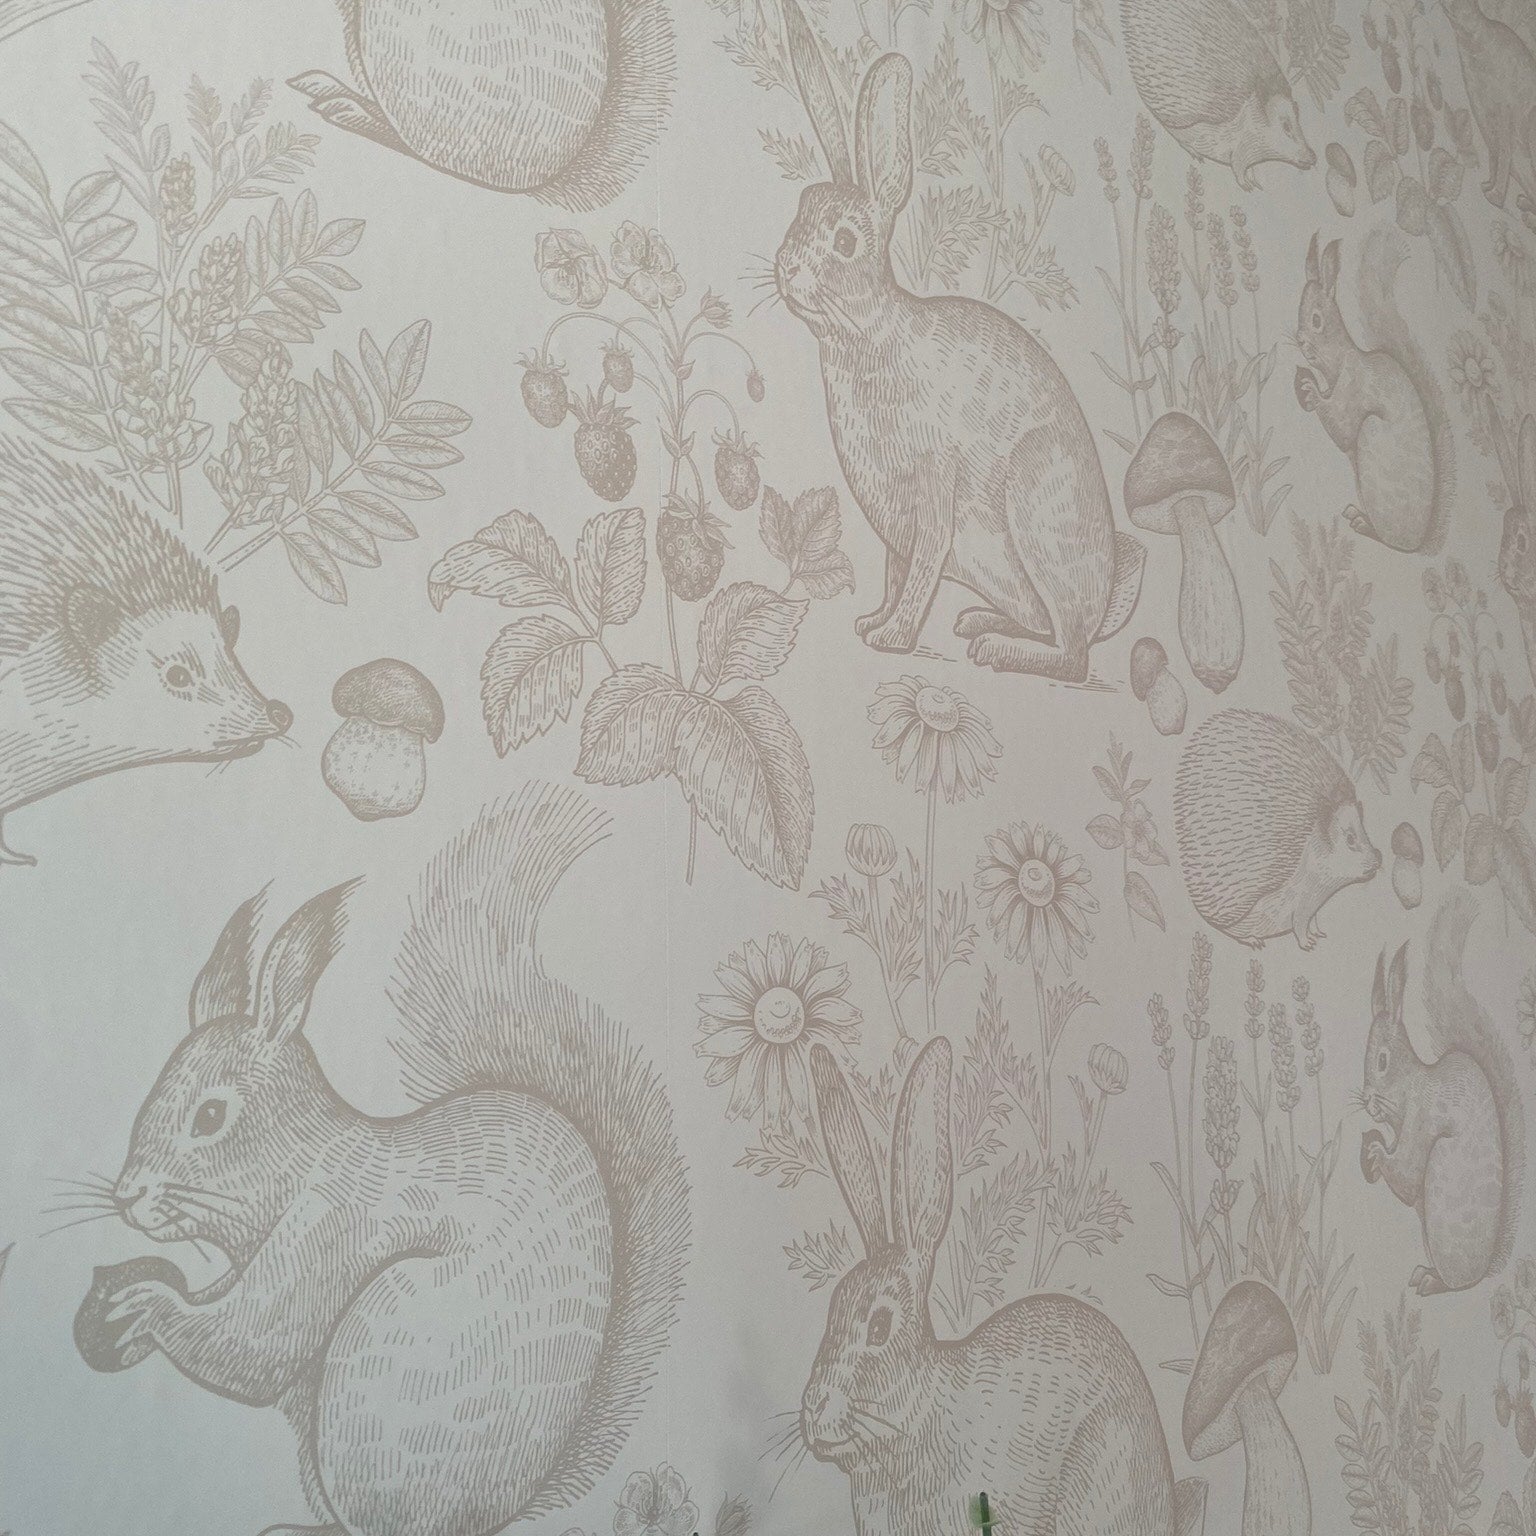 Close-up of a neutral nursery wallpaper depicting various woodland animals like rabbits and squirrels in a detailed beige sketch style.